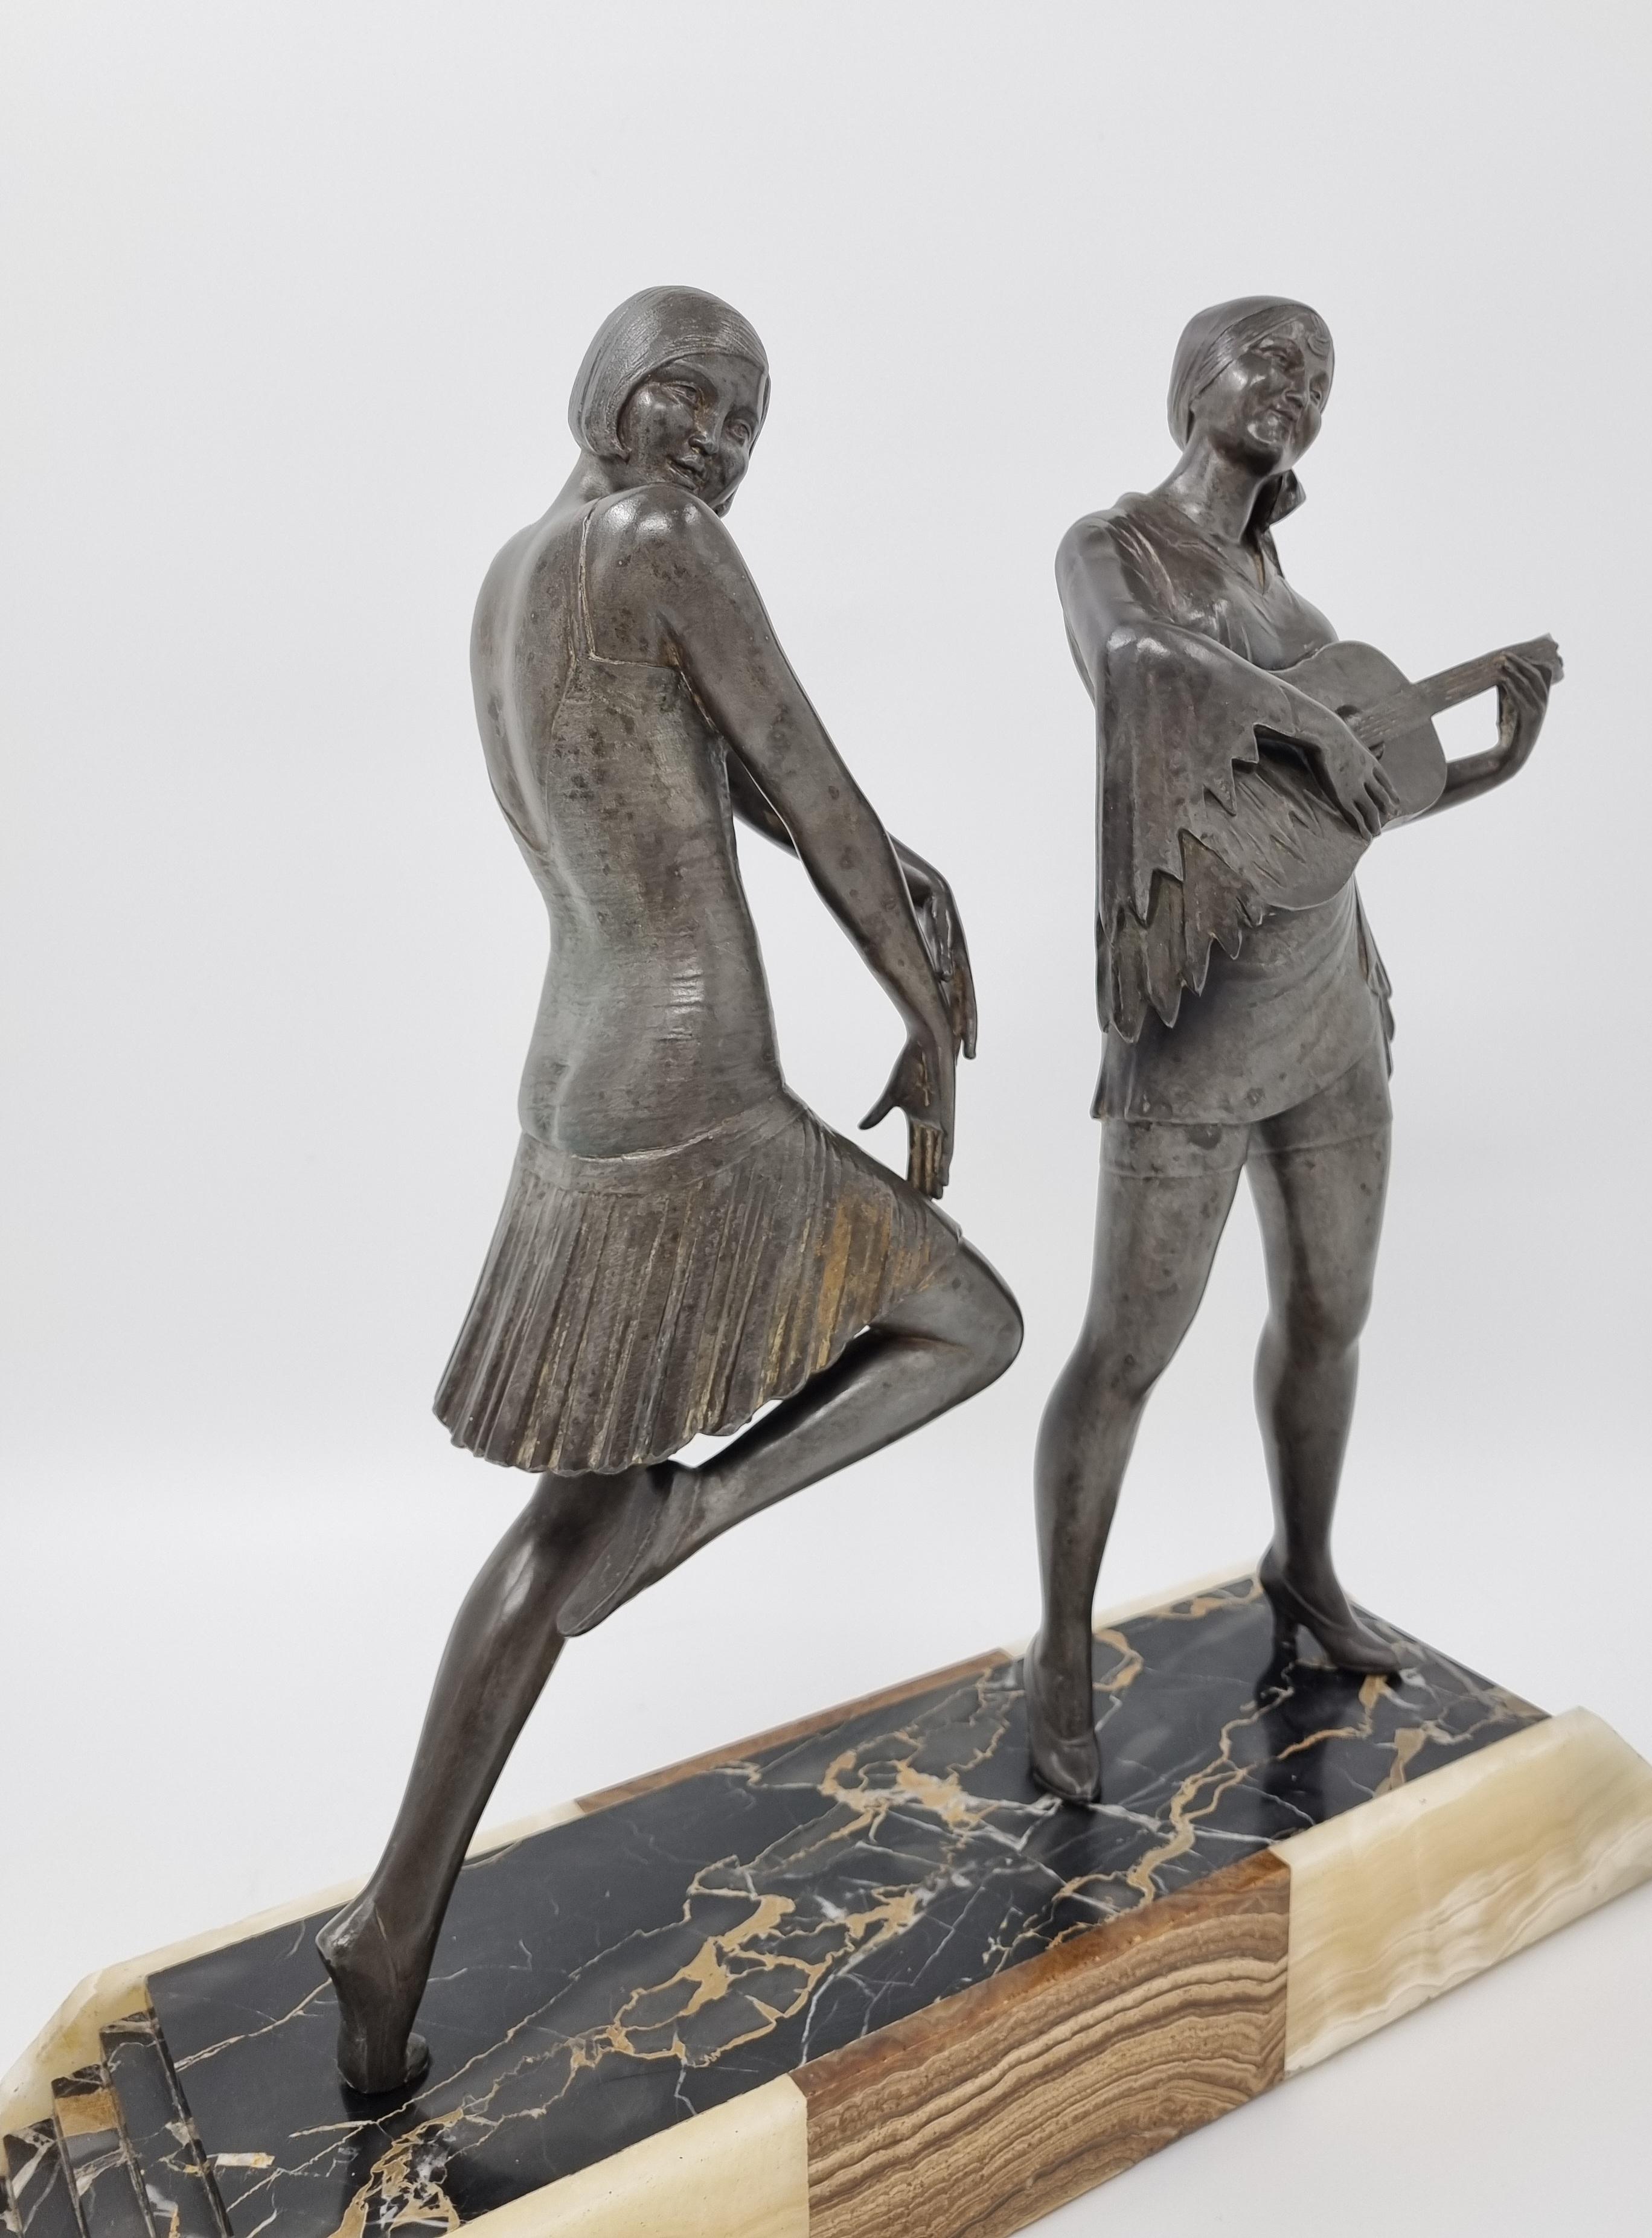 Early 20th Century Art Deco Sculpture Dancer and Musician by Enrique Molins-Balleste For Sale